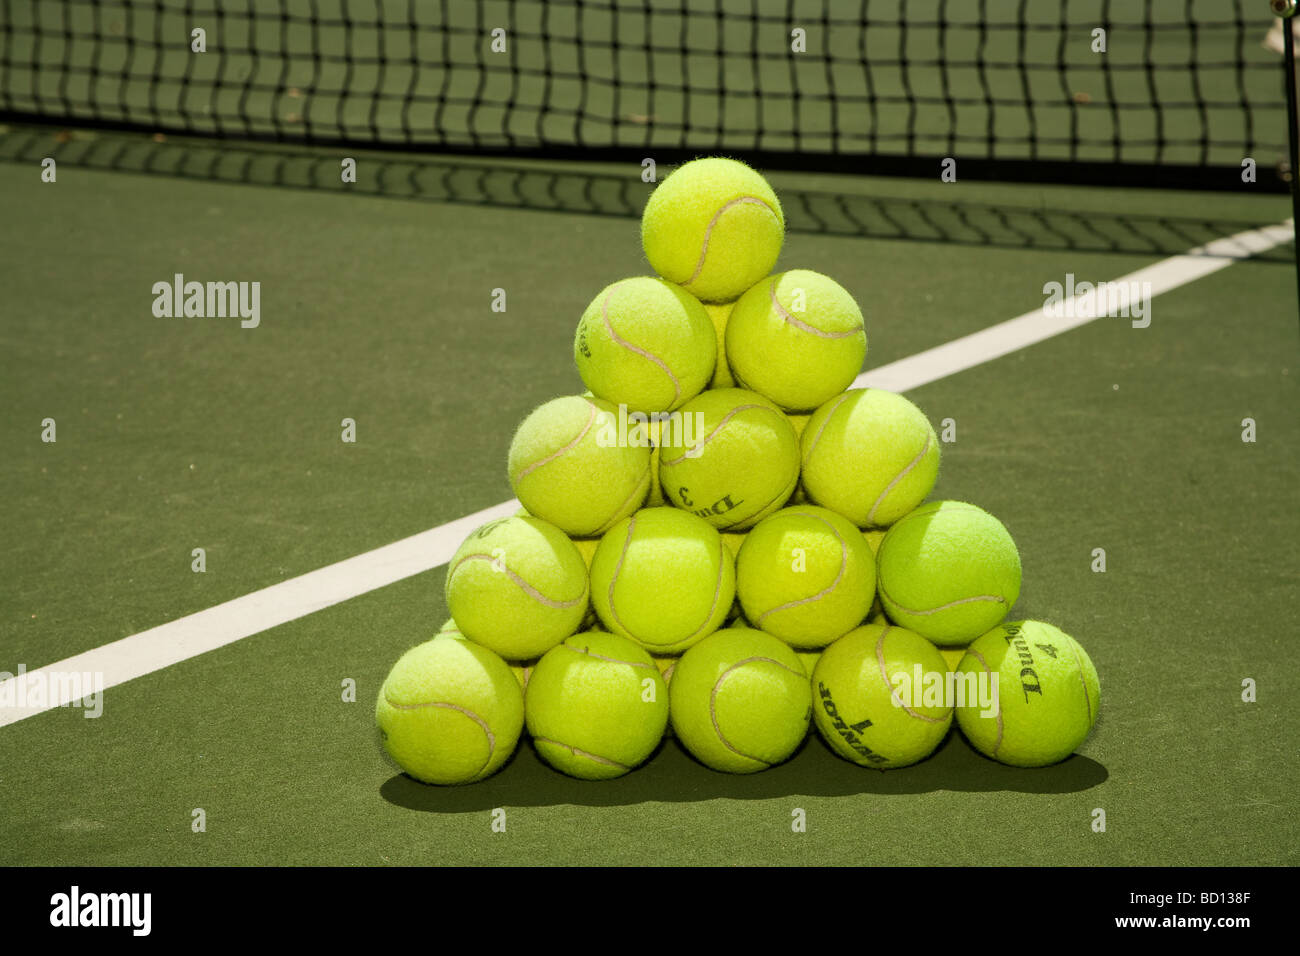 Tennis Balls stacked to form a regular tetrahedron. Stock Photo